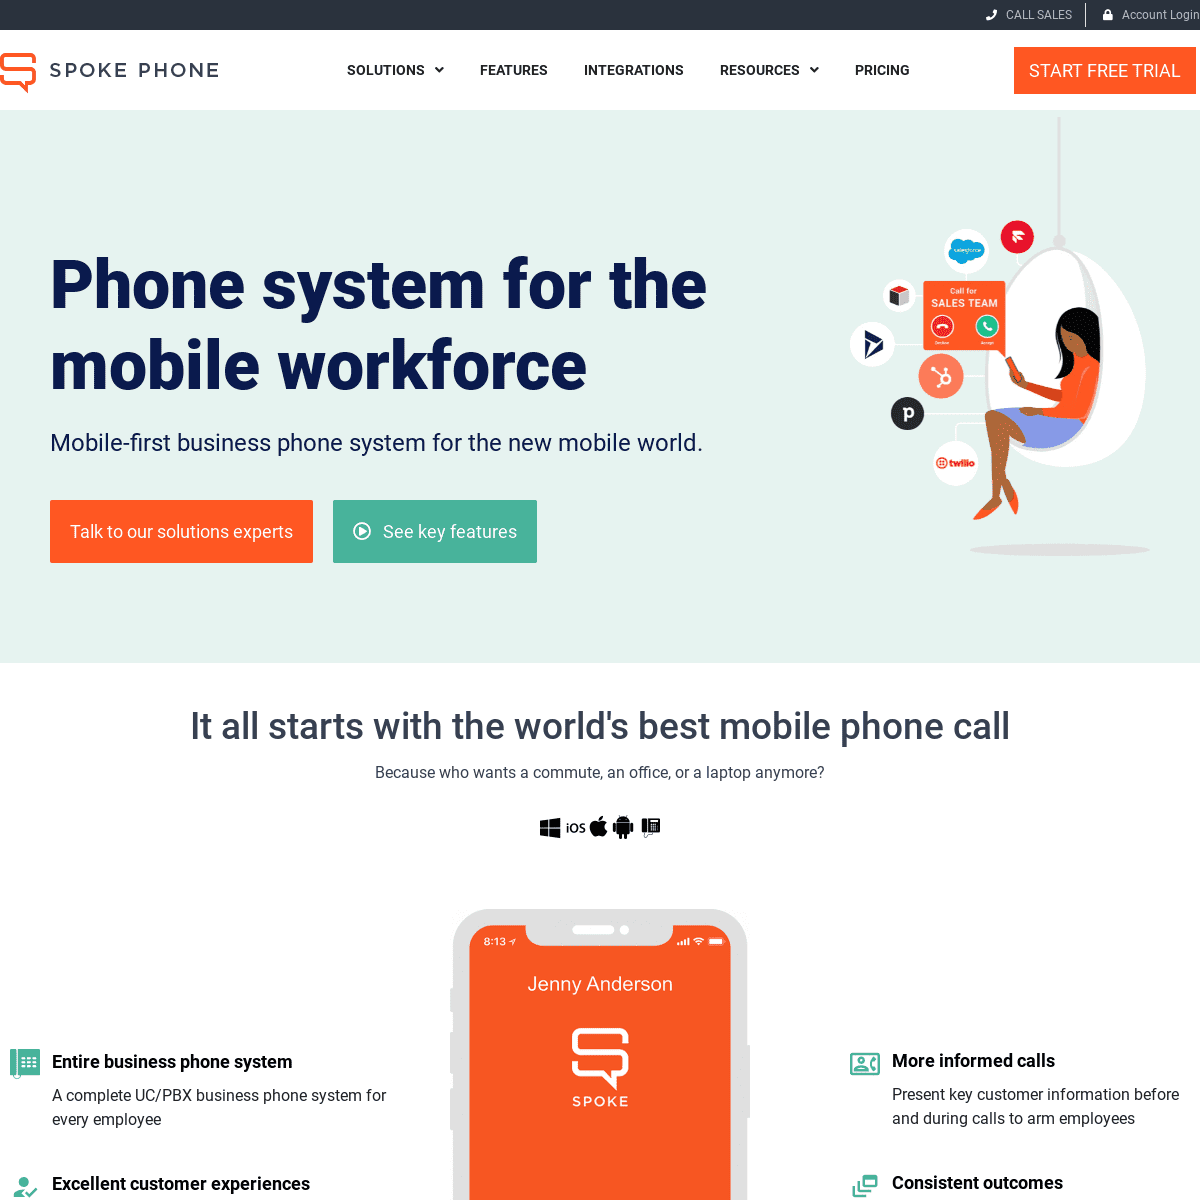 Phone system for the mobile workforce - Spoke Phone